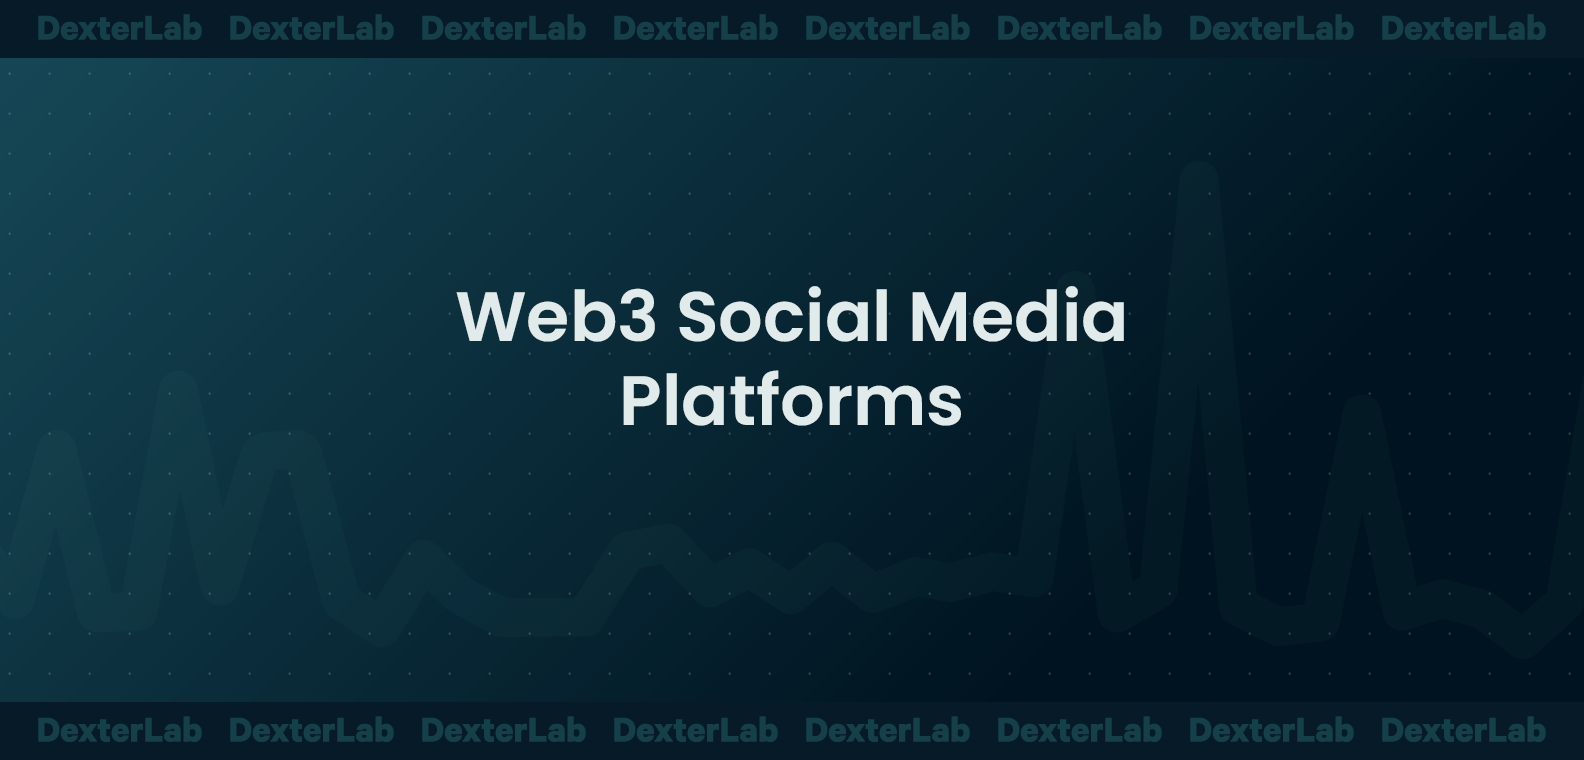 Web3 Social Media Platforms: A Glimpse into the Future of Social Networking